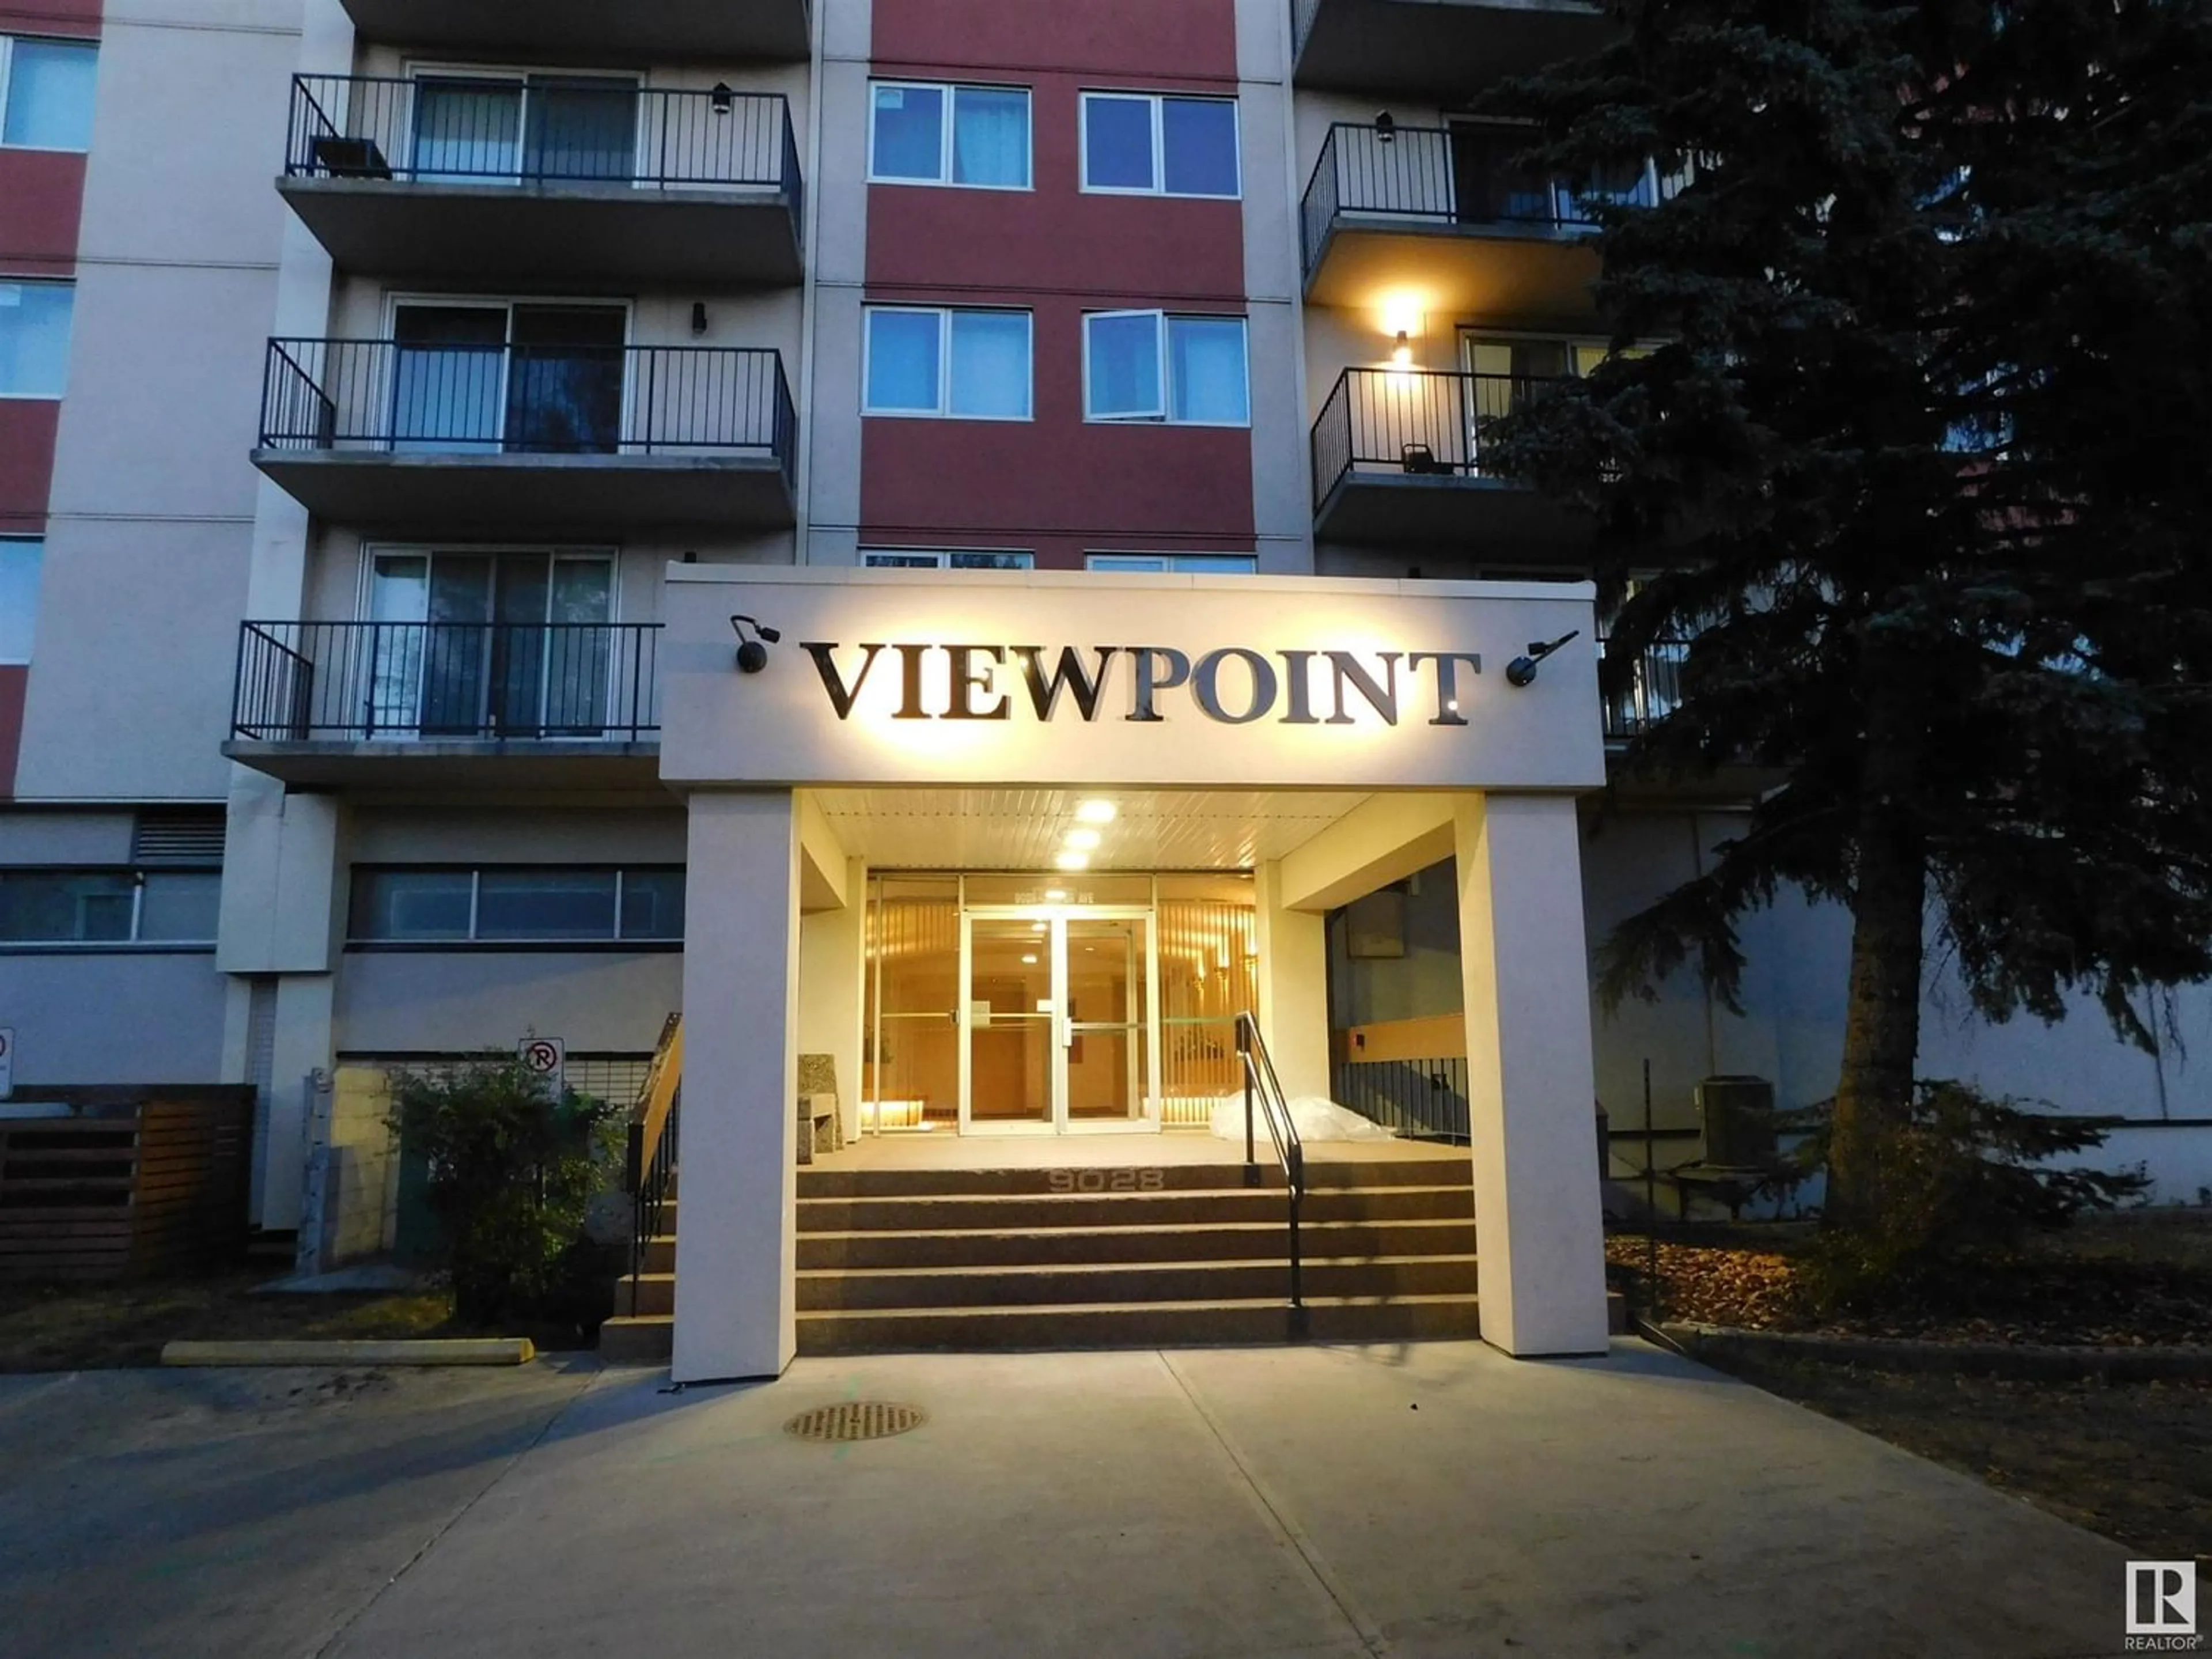 A pic from exterior of the house or condo for #904 9028 JASPER AV NW, Edmonton Alberta T5H3Y2